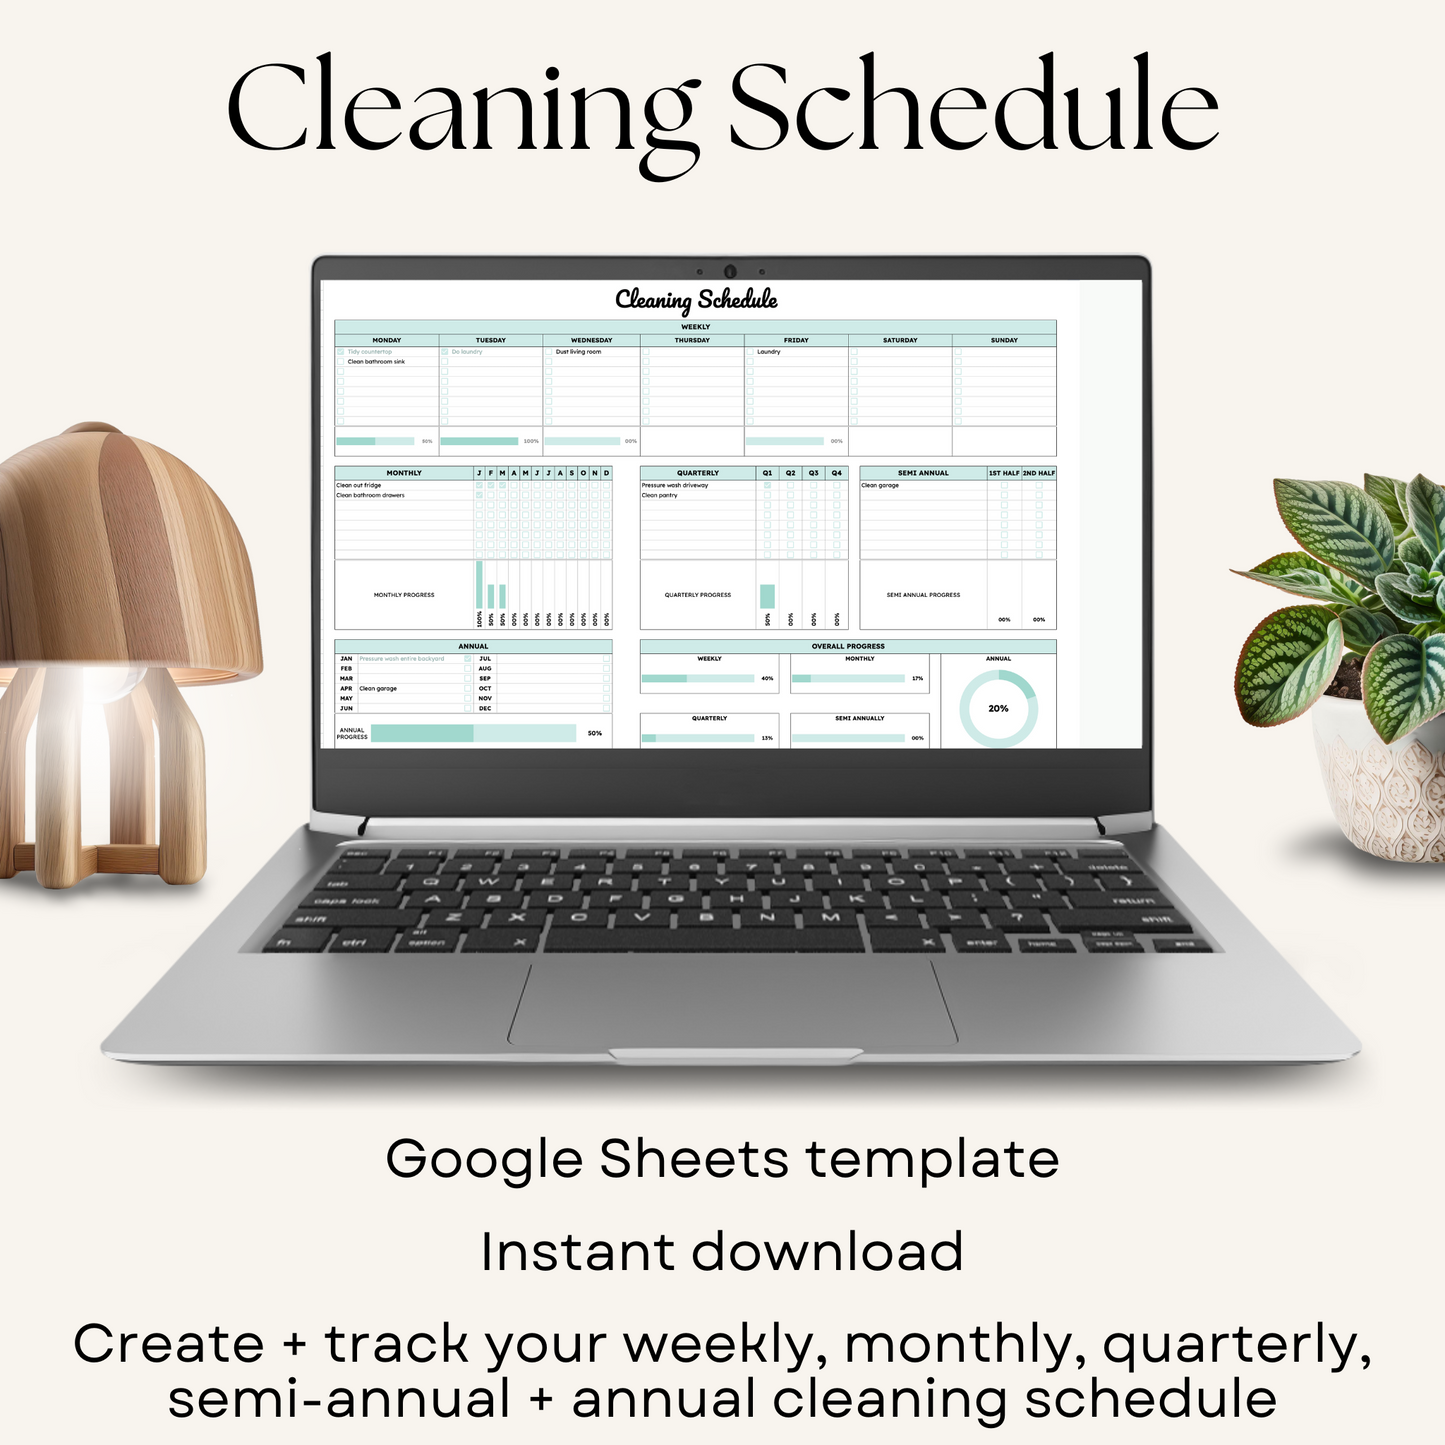 digital cleaning schedule google sheets template. track weekly, daily, monthly, quarterly, semi annual and annual cleaning tasks.